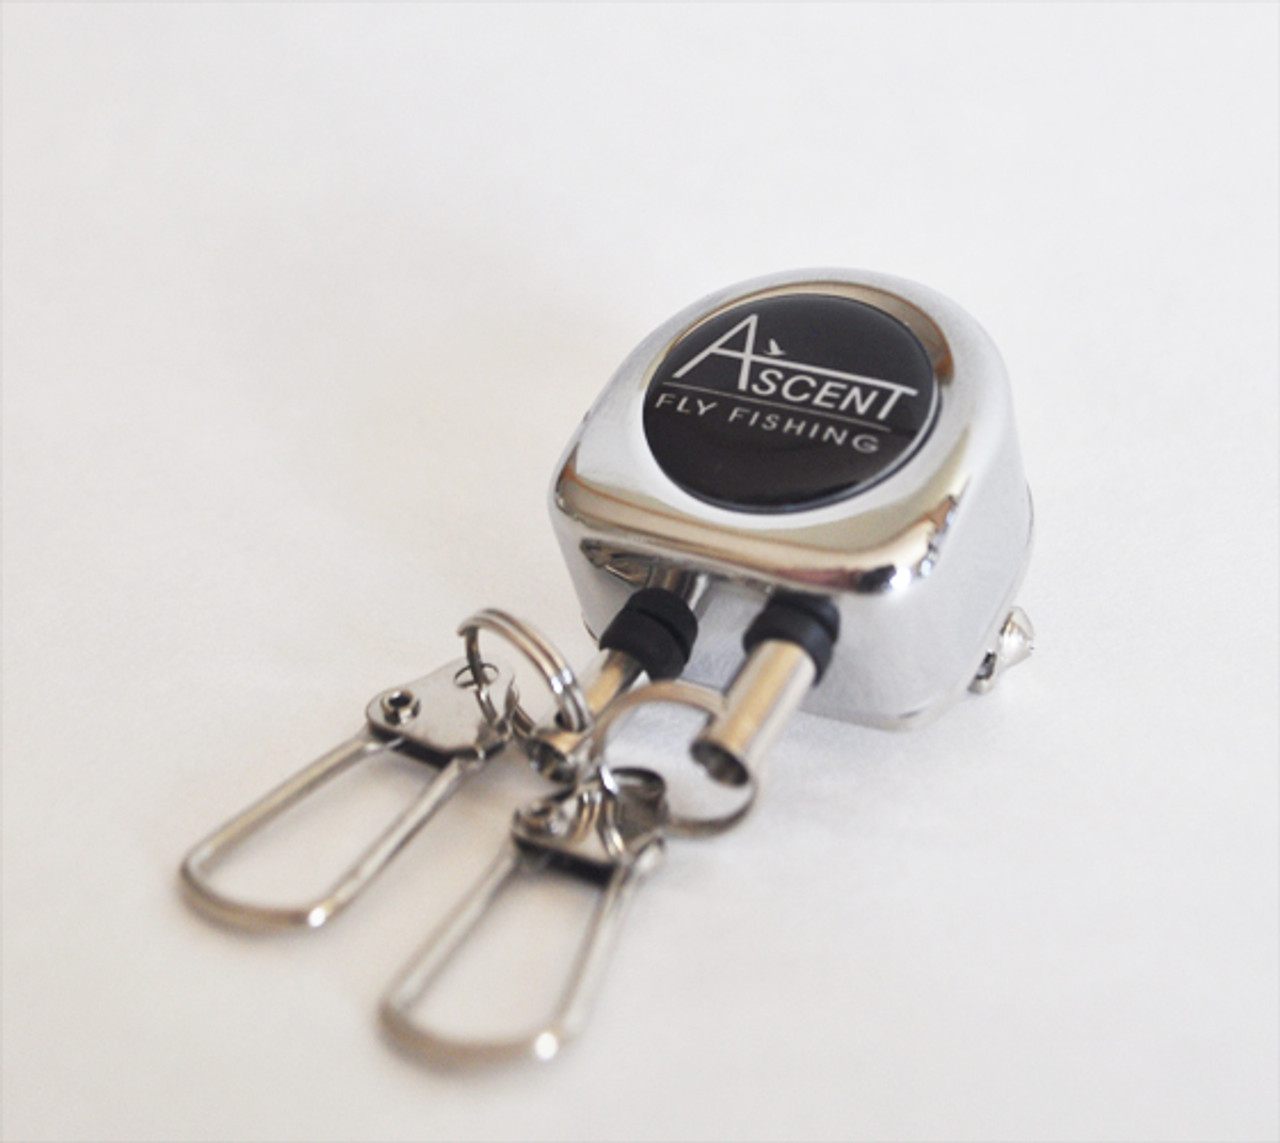 Double Zinger - Ascent Fly Fishing